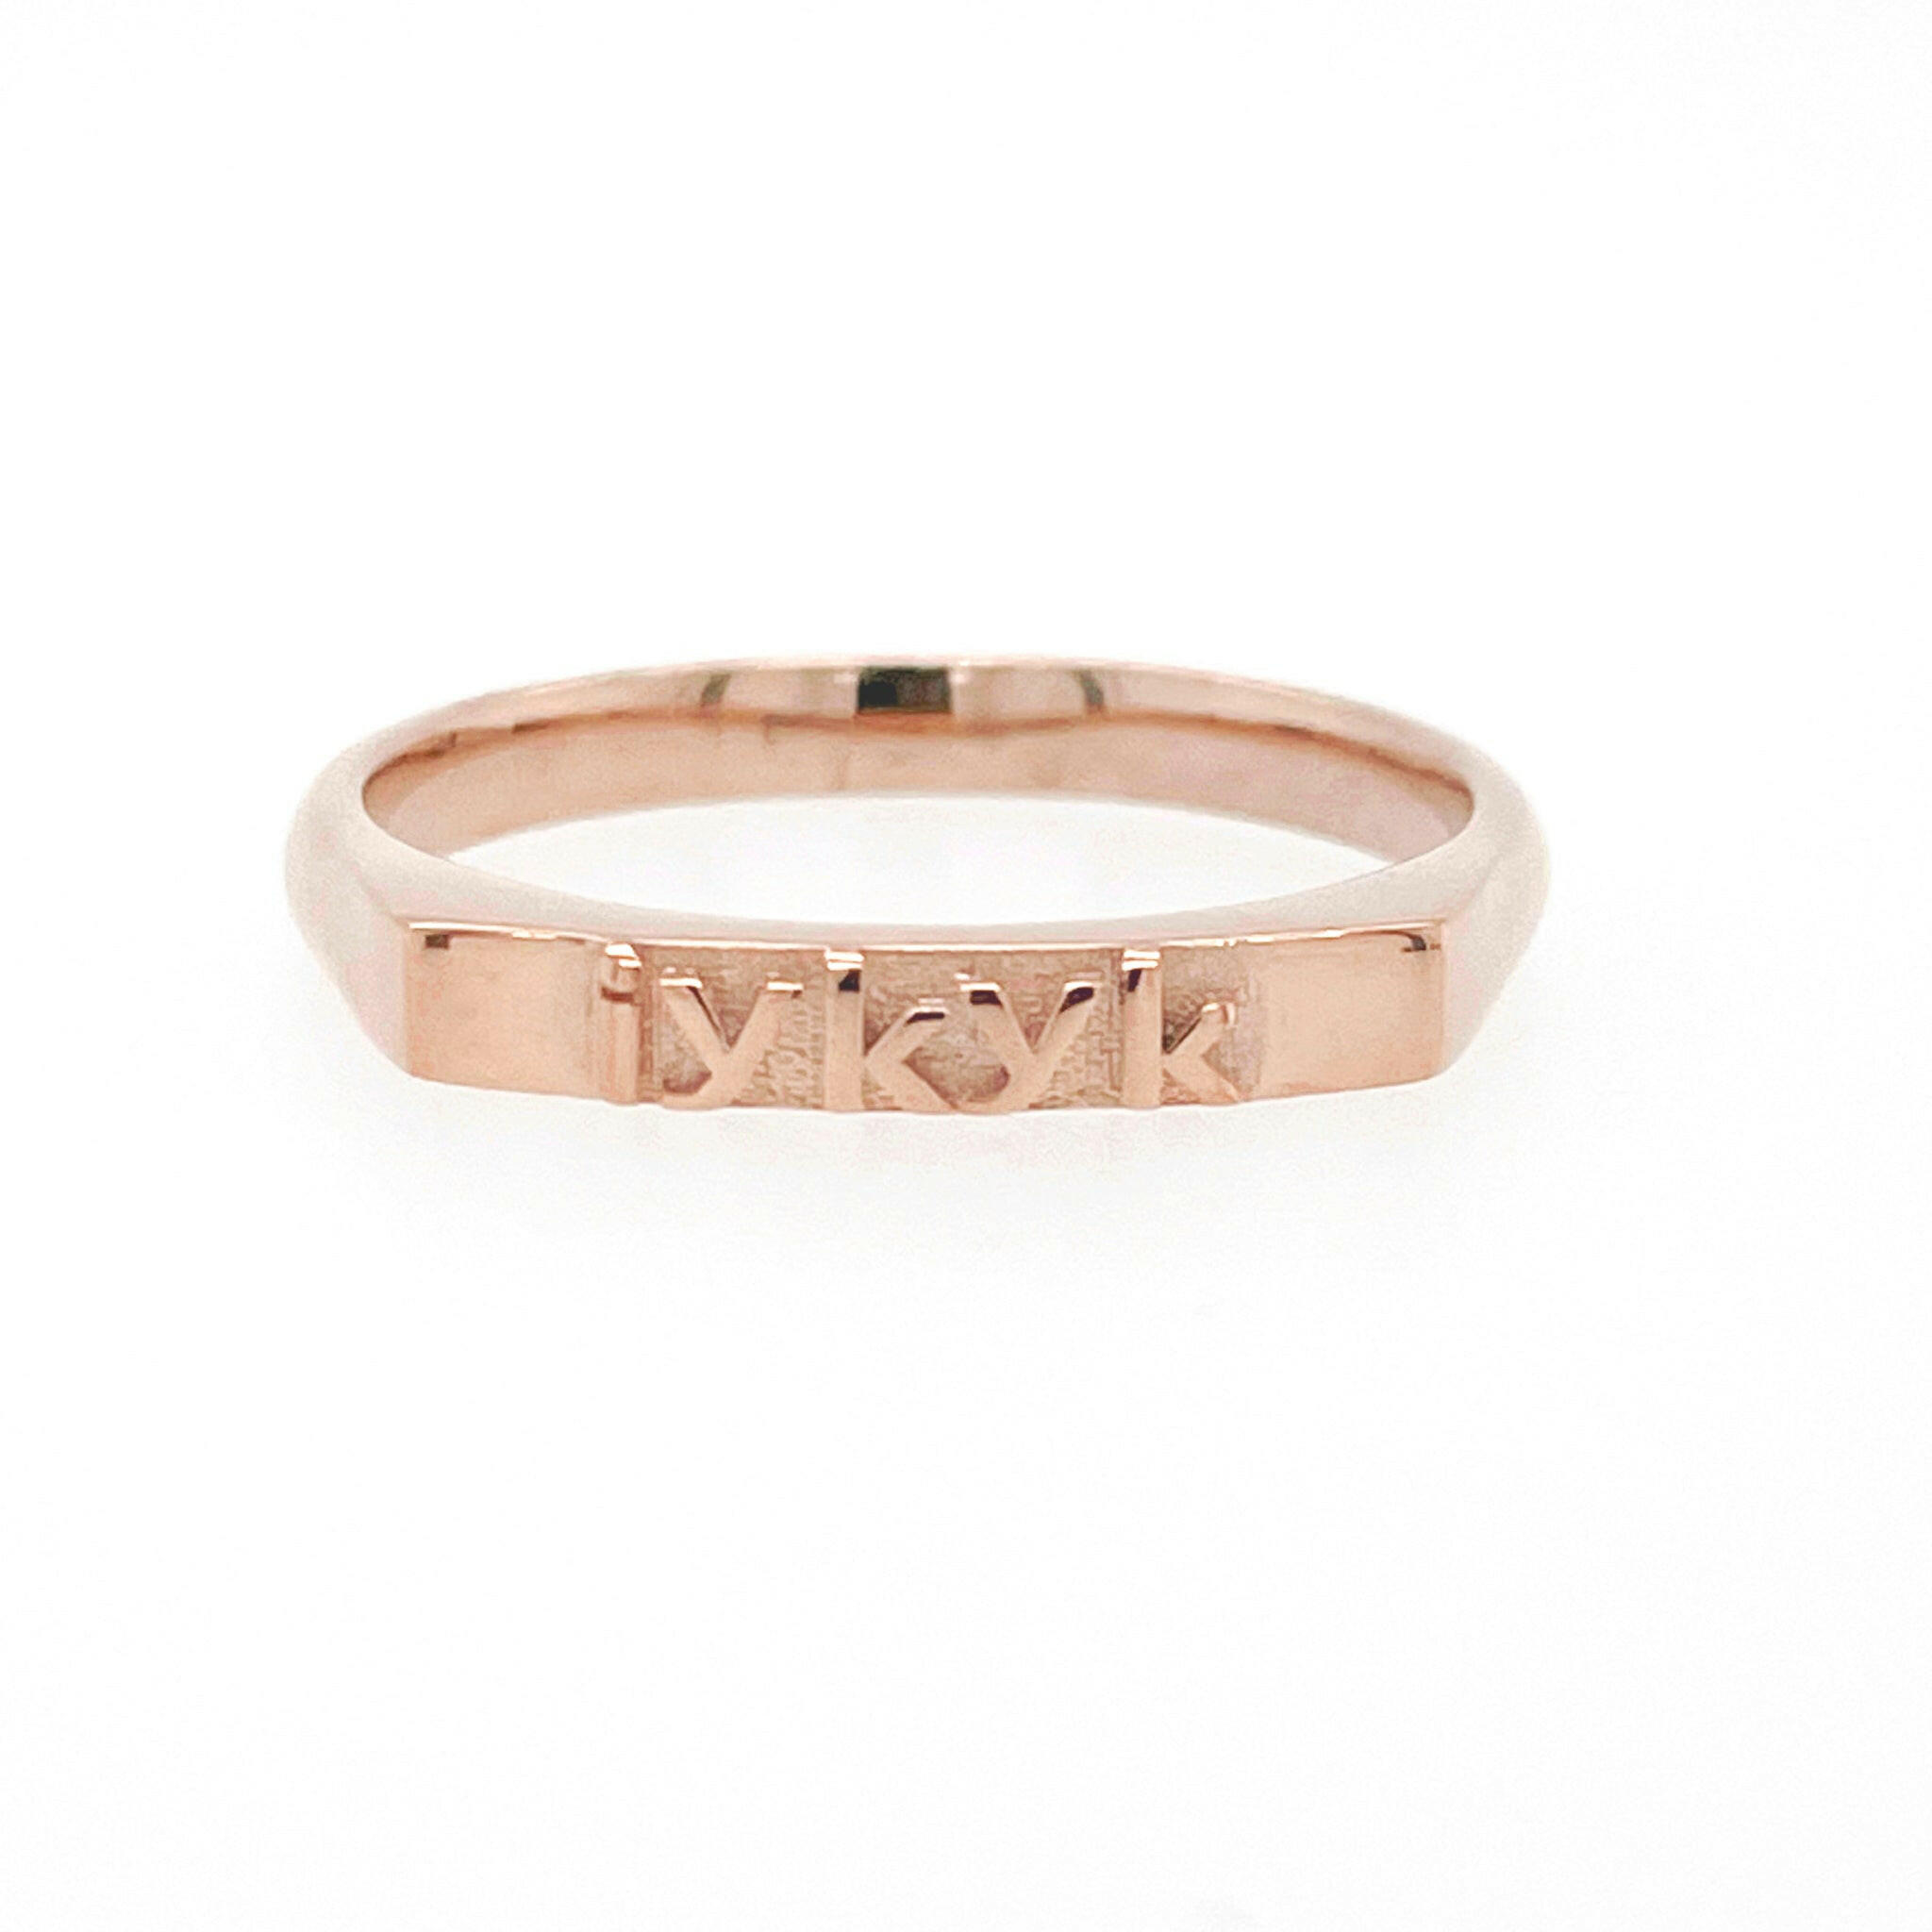 front view of 14 karat rose gold ring with text that reads "if you know you know" acronym "i y k y k"